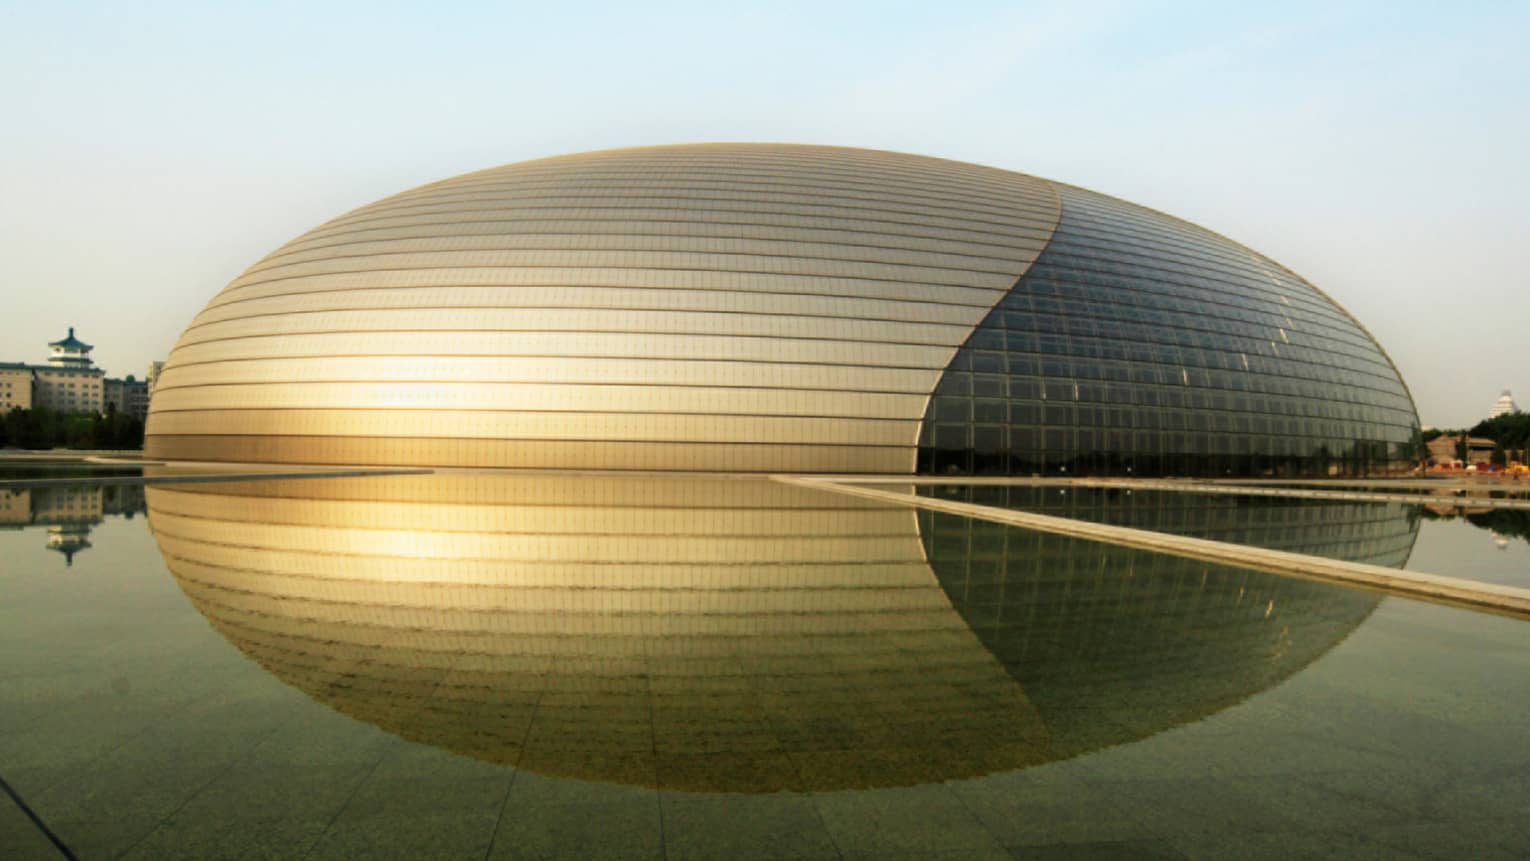 Exterior of Beijing National Centre for the Performing arts gold egg-shaped building